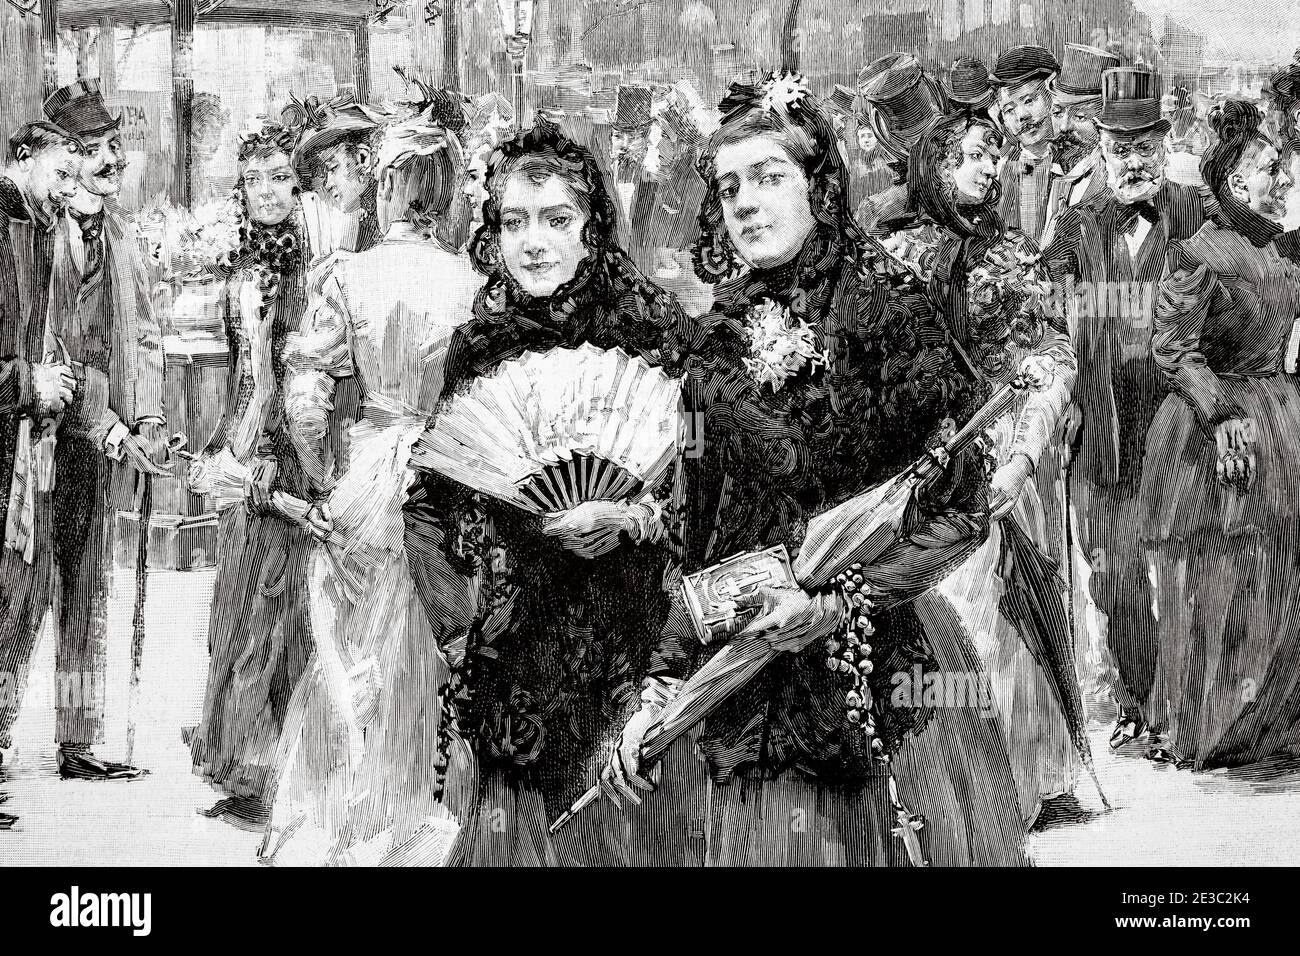 Typical Madrid characters from the 19th century visit Los Sagrarios, Madrid. Spain, Europe. Old XIX century engraved illustration from La Ilustracion Española y Americana 1894 Stock Photo